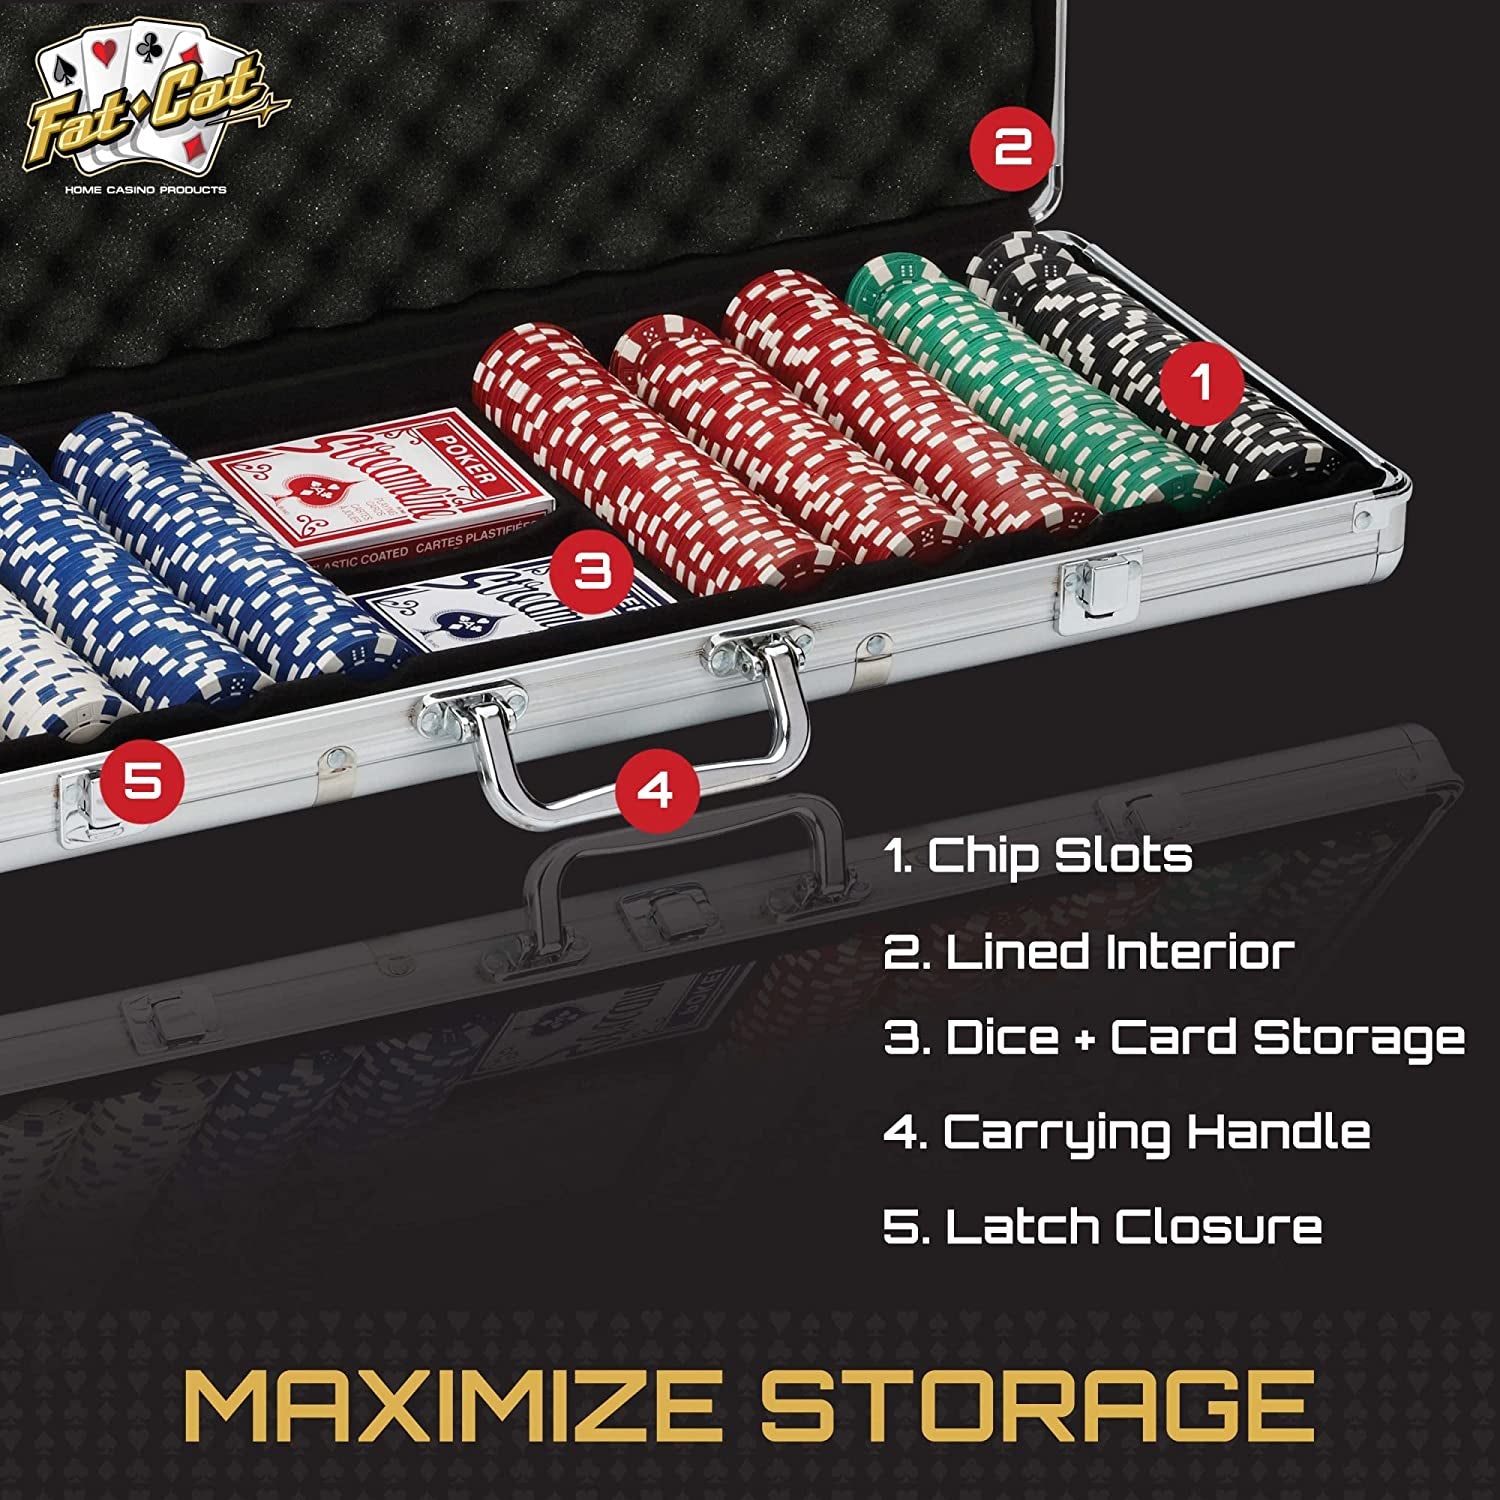 Fat Cat 11.5 Gram Texas Hold 'Em Claytec Poker Chip Set with Aluminum Case, 500 Striped Dice Chips